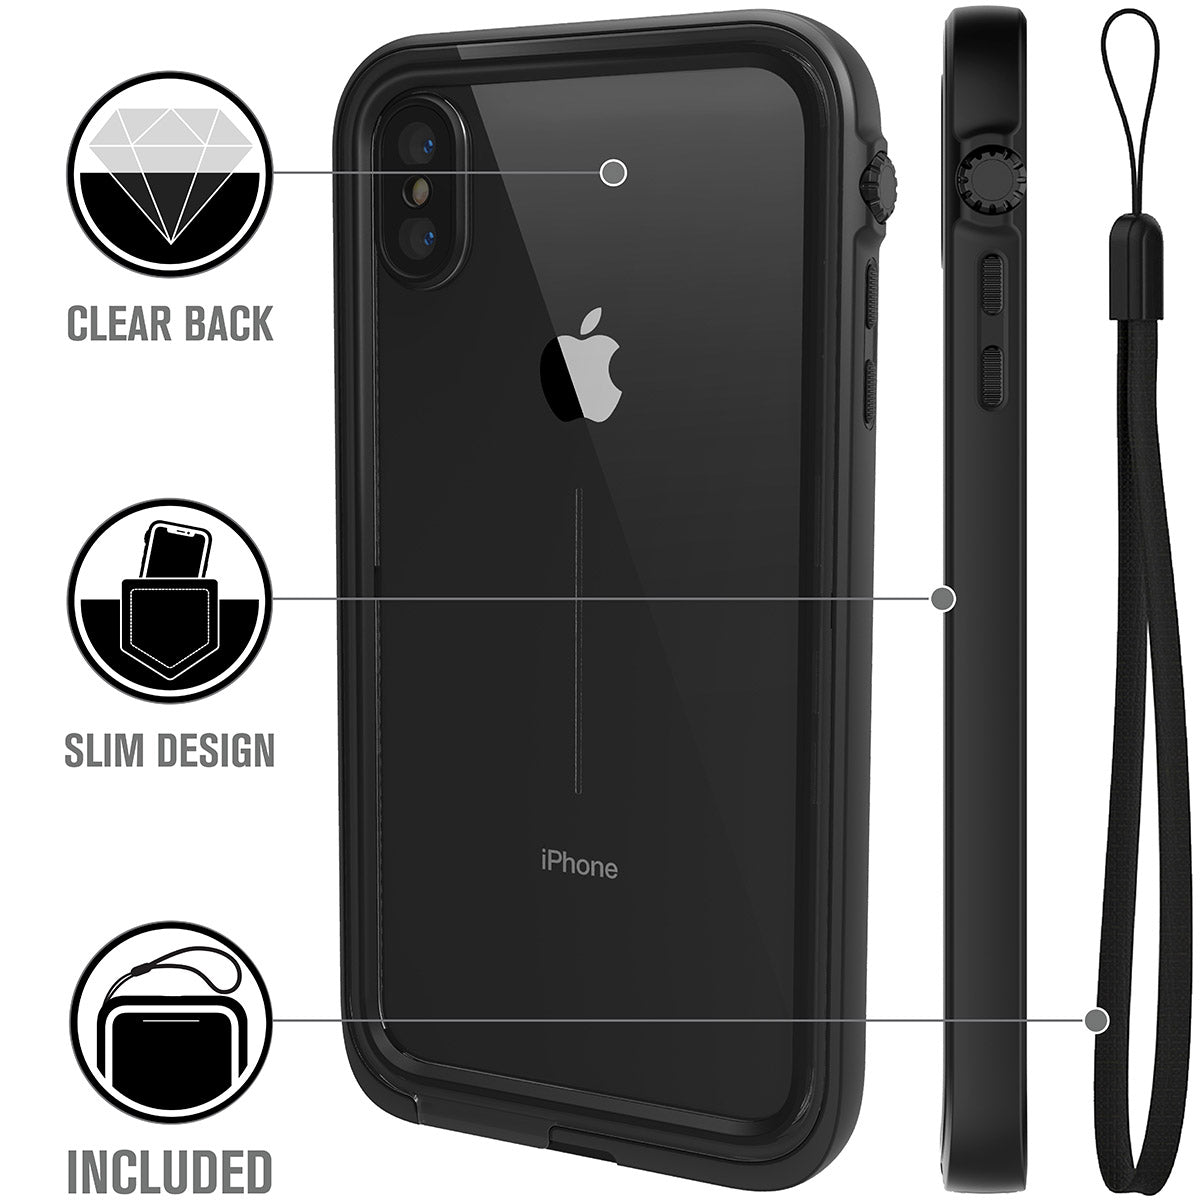 Catalyst iphone x/xr/xs/xs max waterproof case xs max showing the case features with lanyard in stealth black text reads clear back slim design included